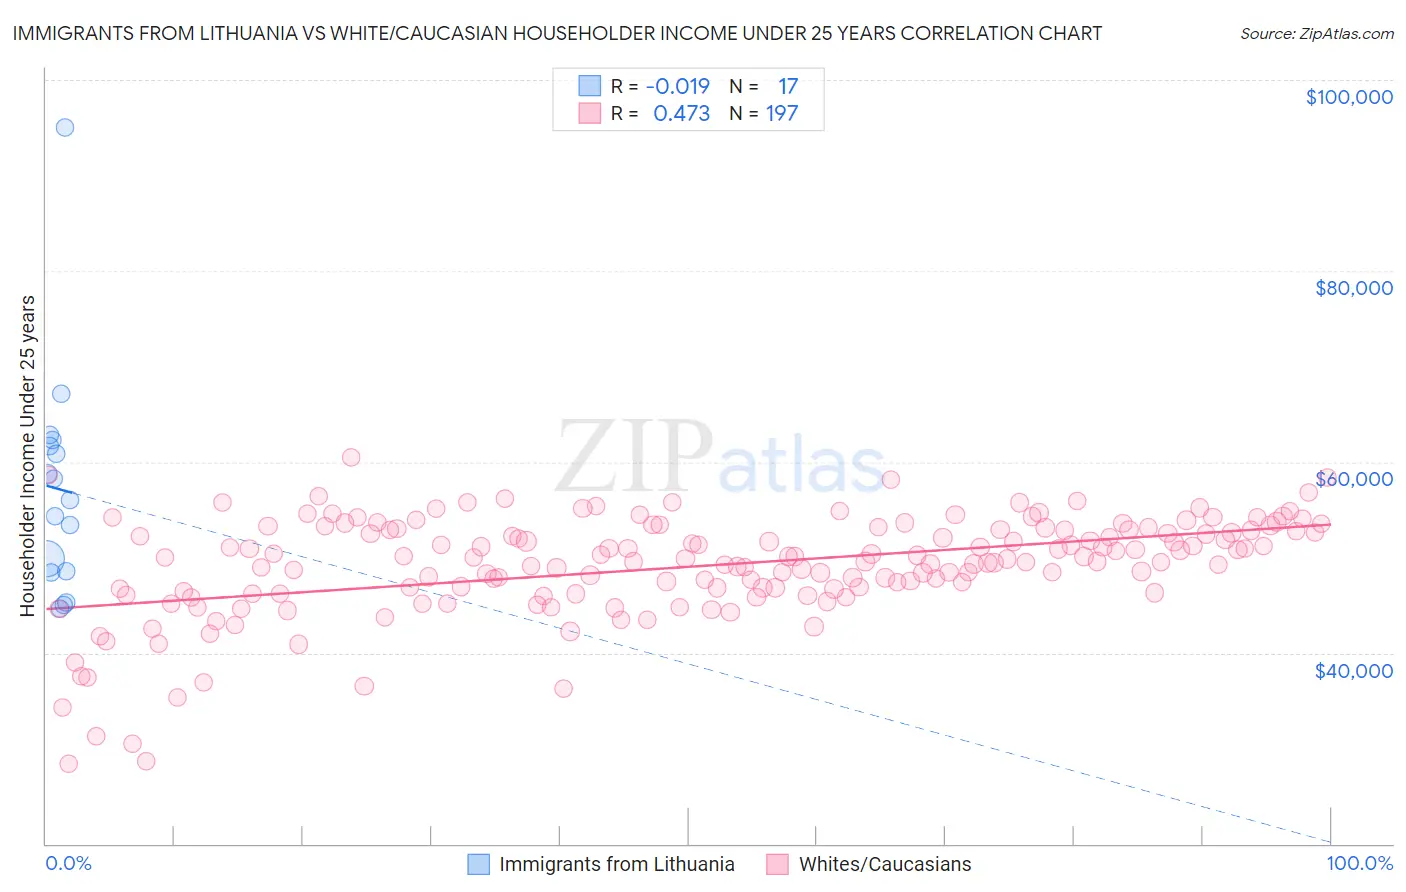 Immigrants from Lithuania vs White/Caucasian Householder Income Under 25 years